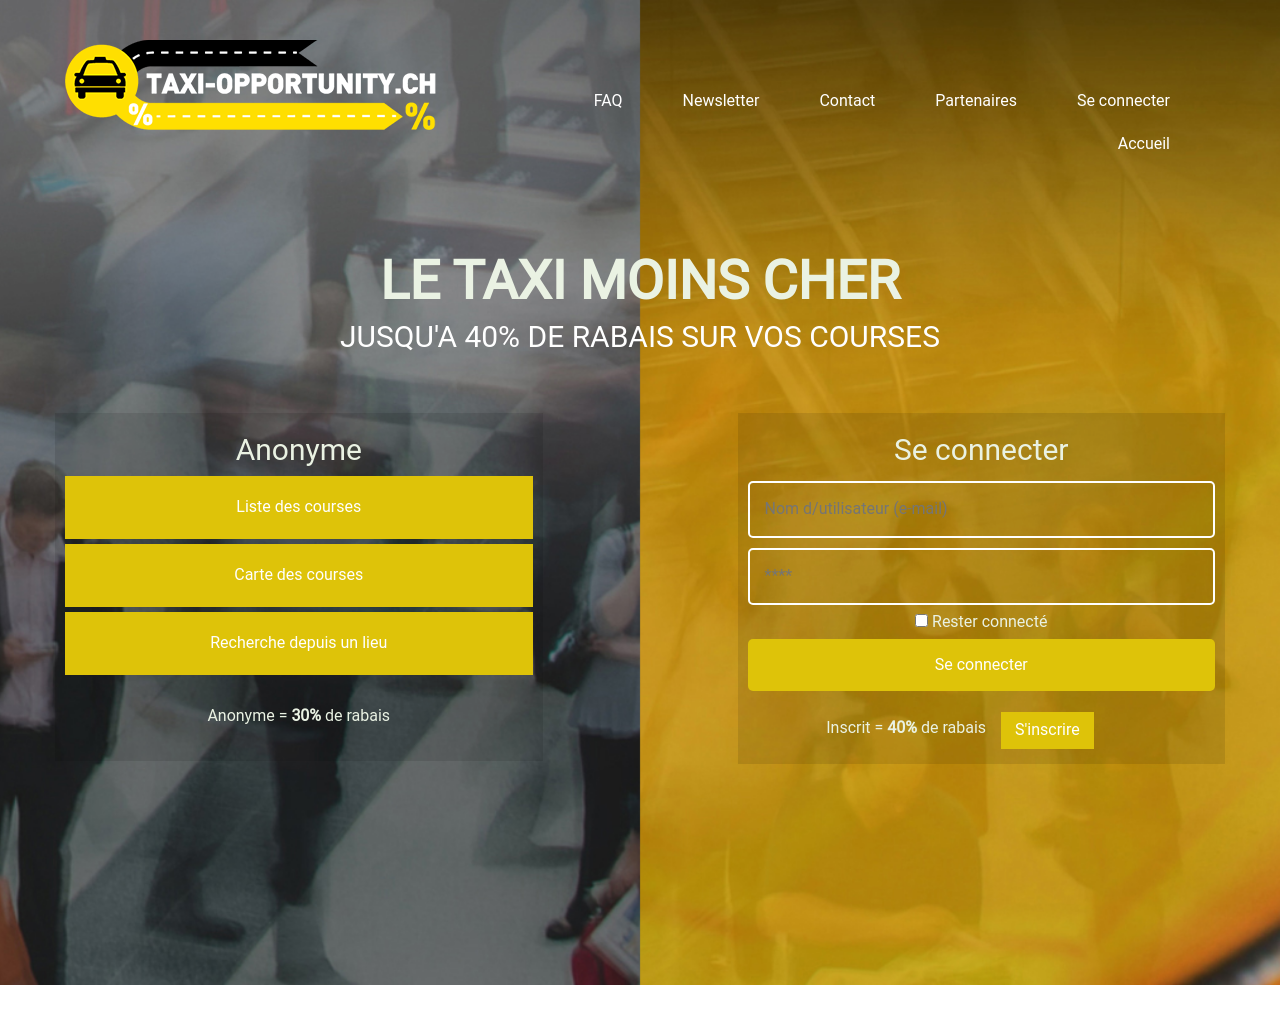 taxi-opportunity.ch